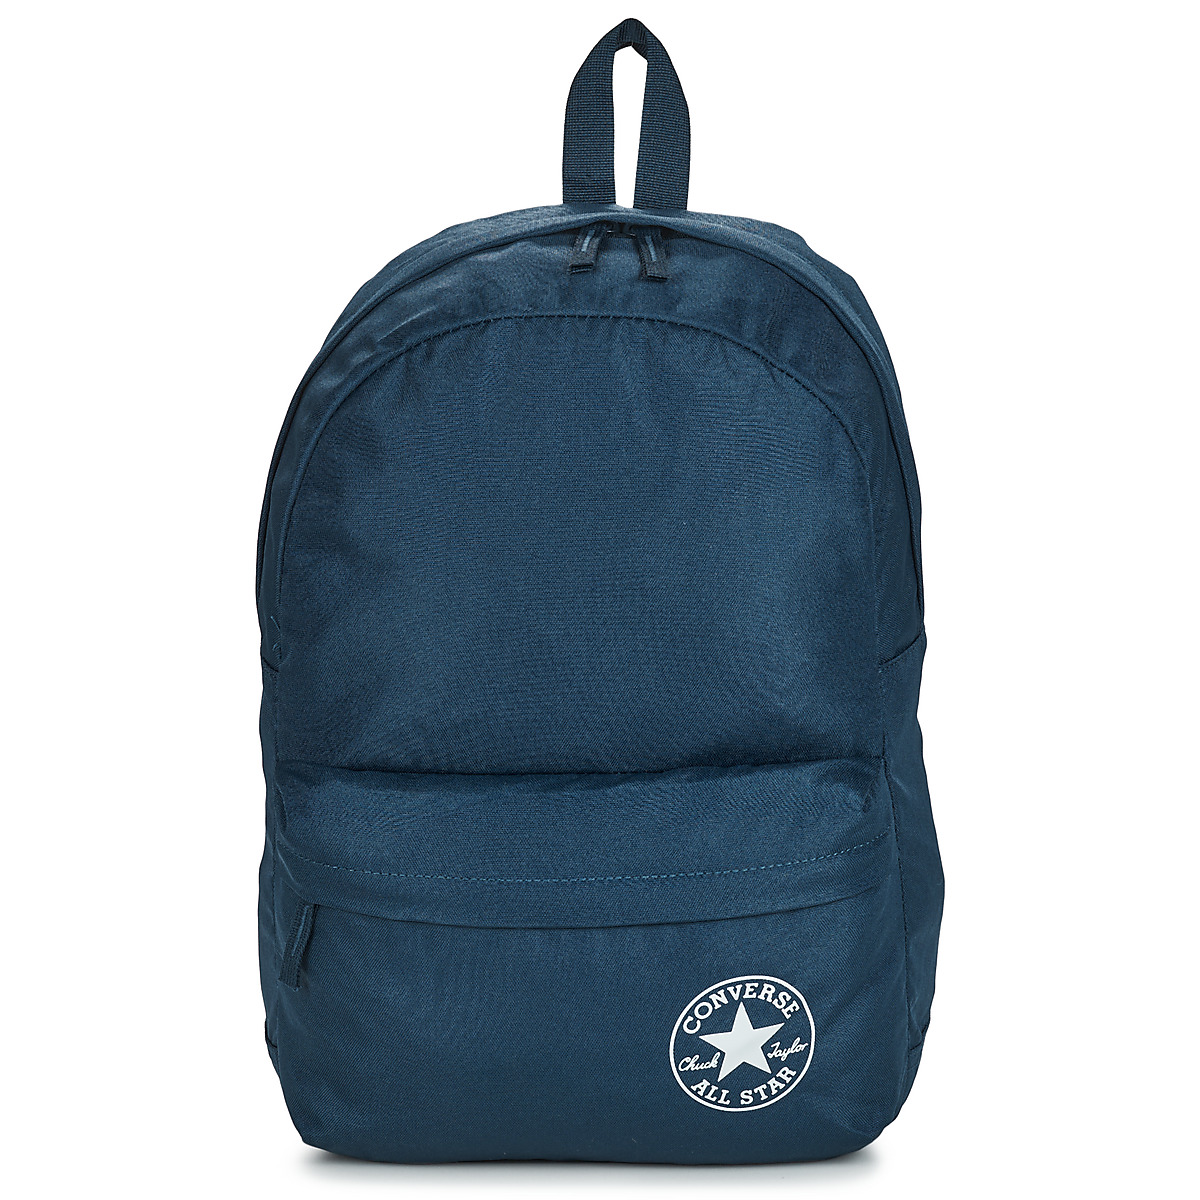 Sacs Add this Converse sweatpants to your little ones everyday casual wear collection Converse SPEED 3 BACKPACK Marine